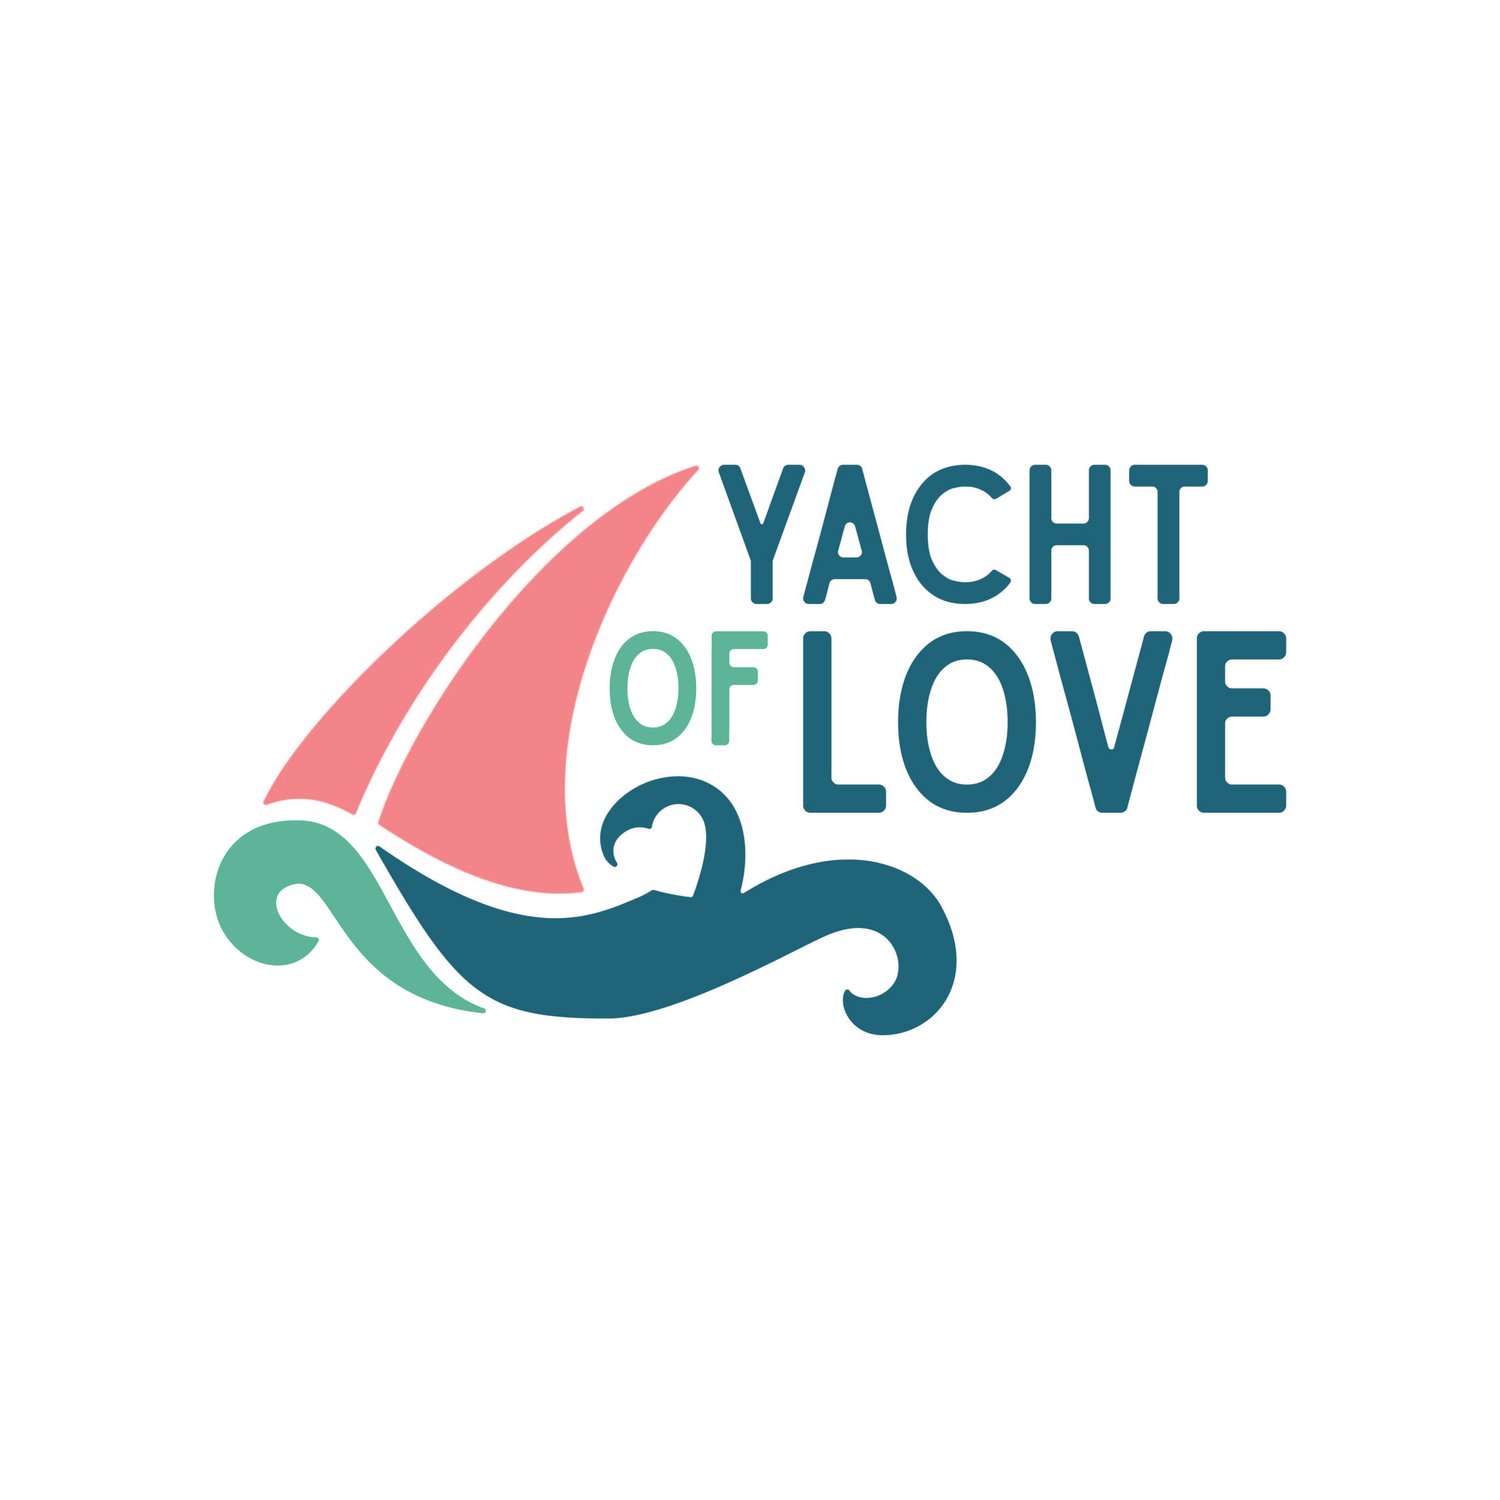 A Yacht of Love